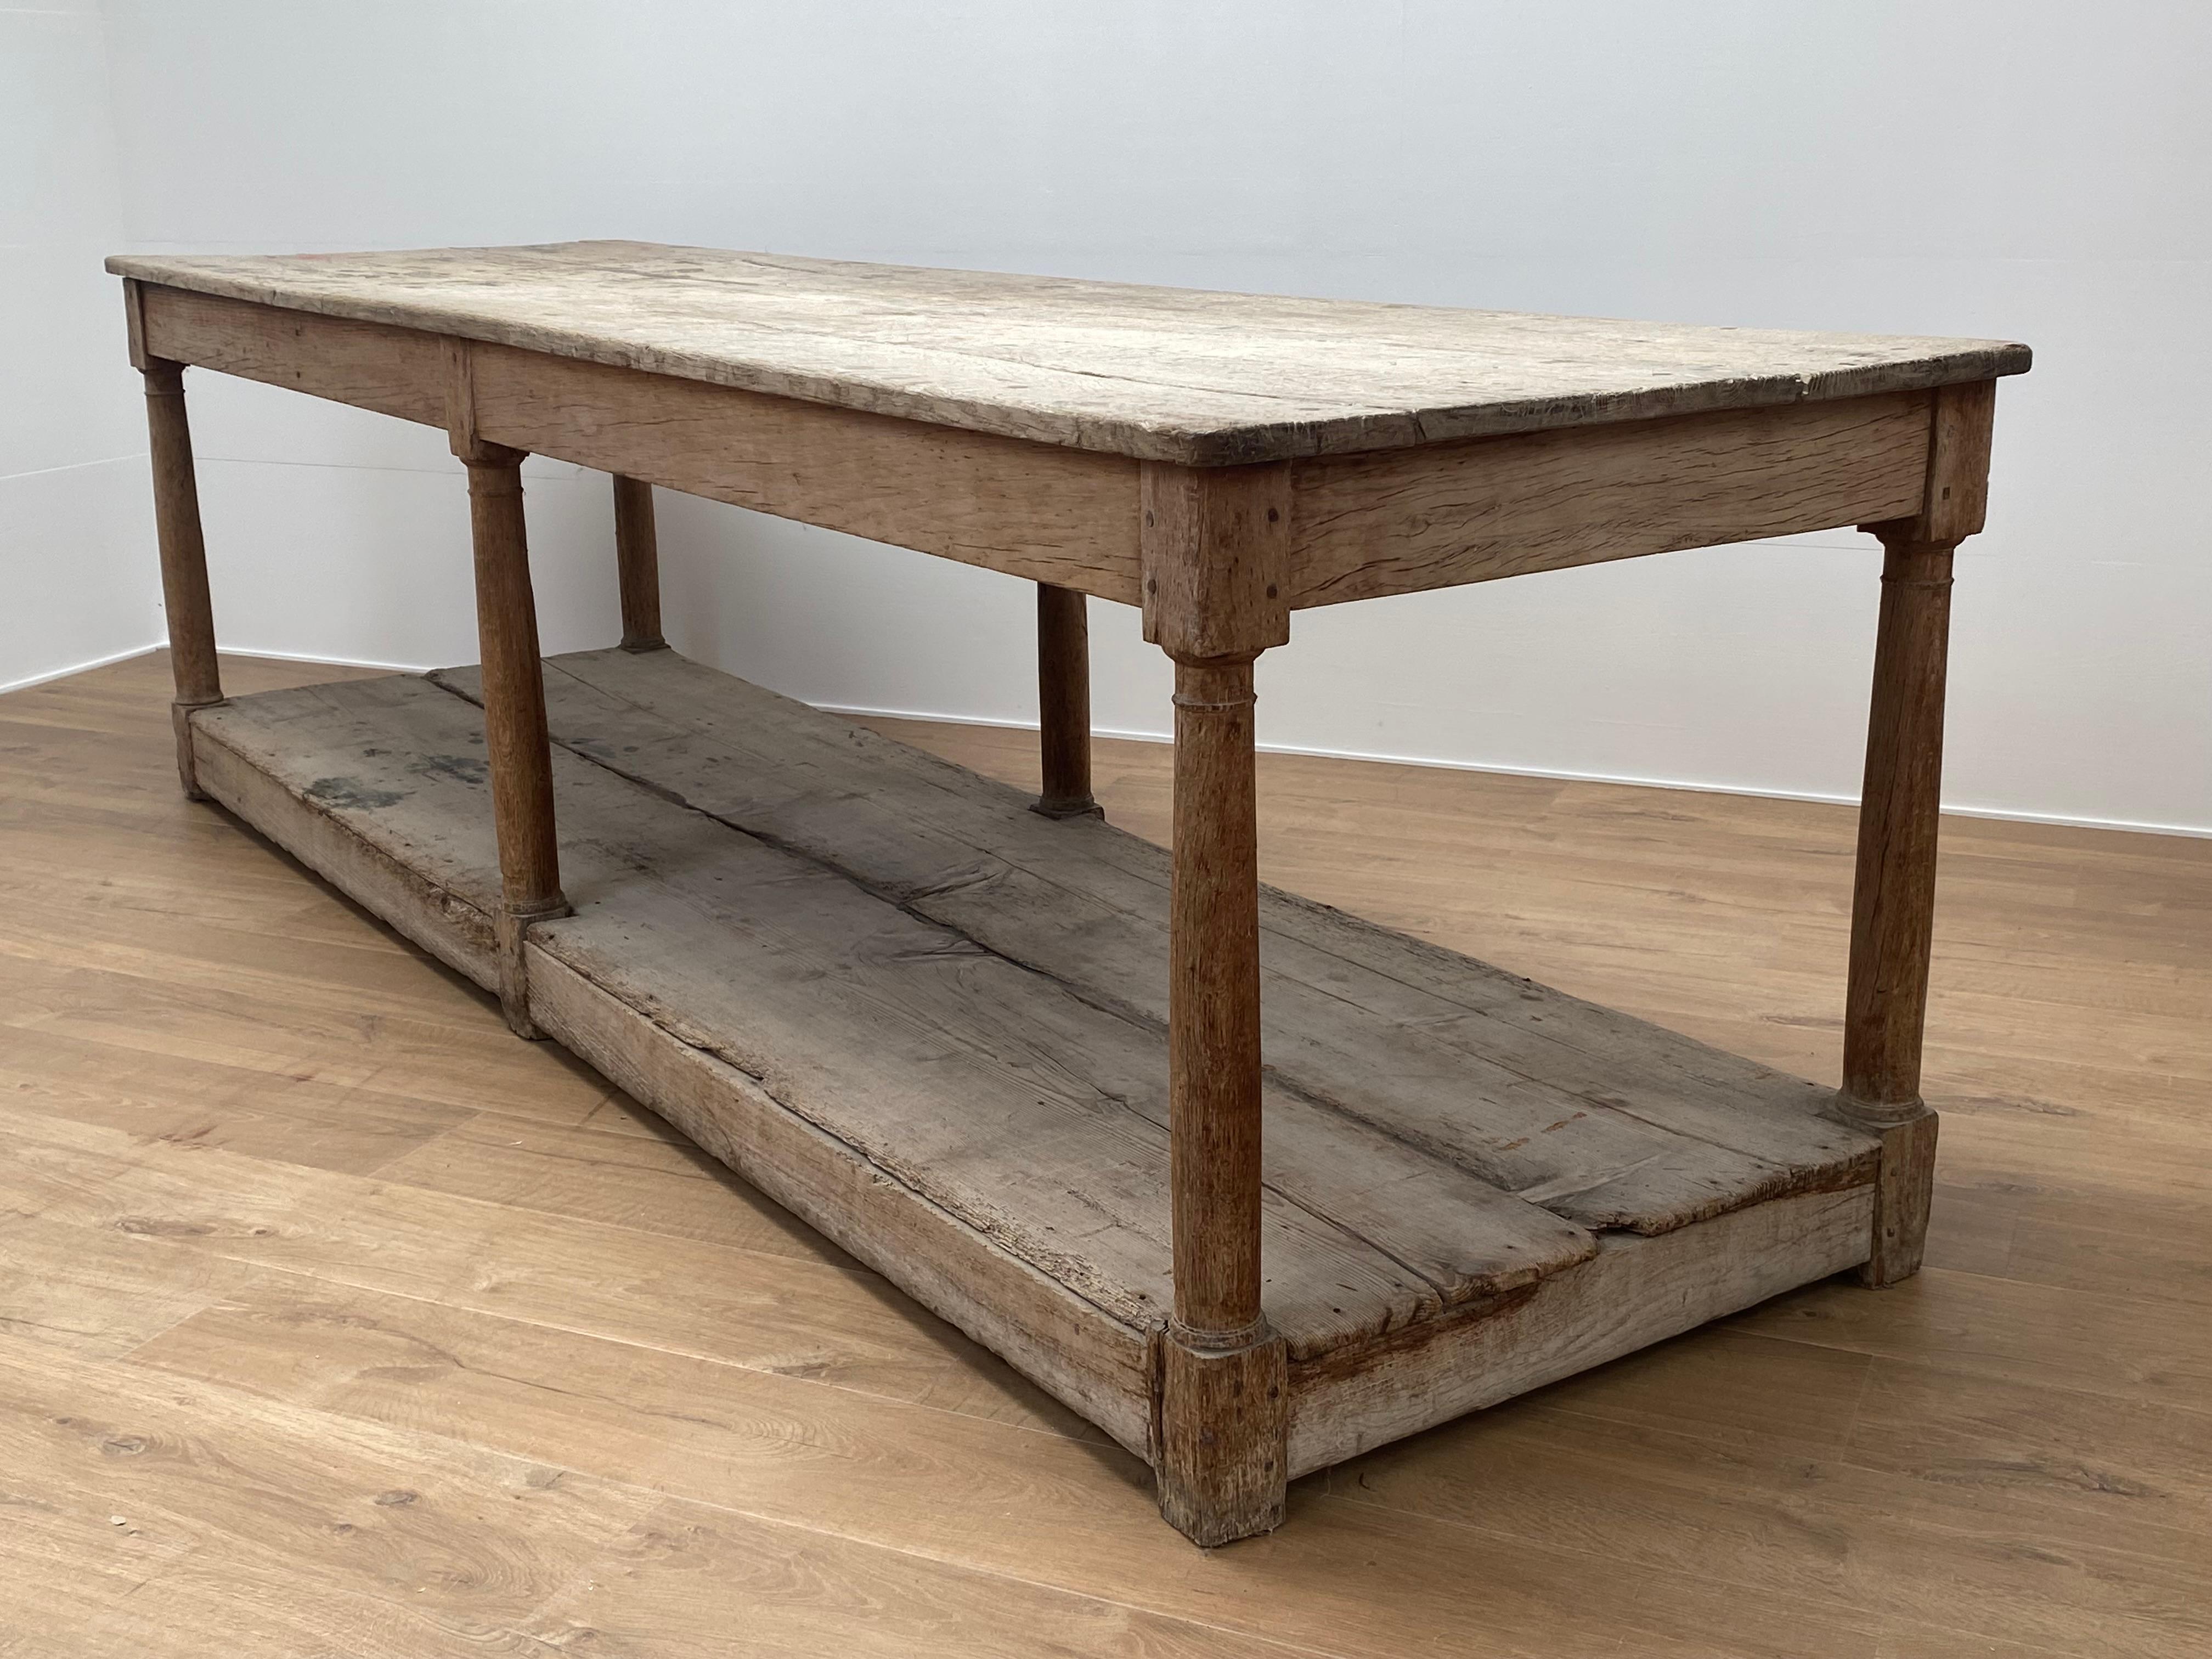 A rustic, Brutalist and Antique French drapiers table in a bleached oak,
good old shine and patina,
ideal table to decorate in your kitchen or in the dining room or entry.